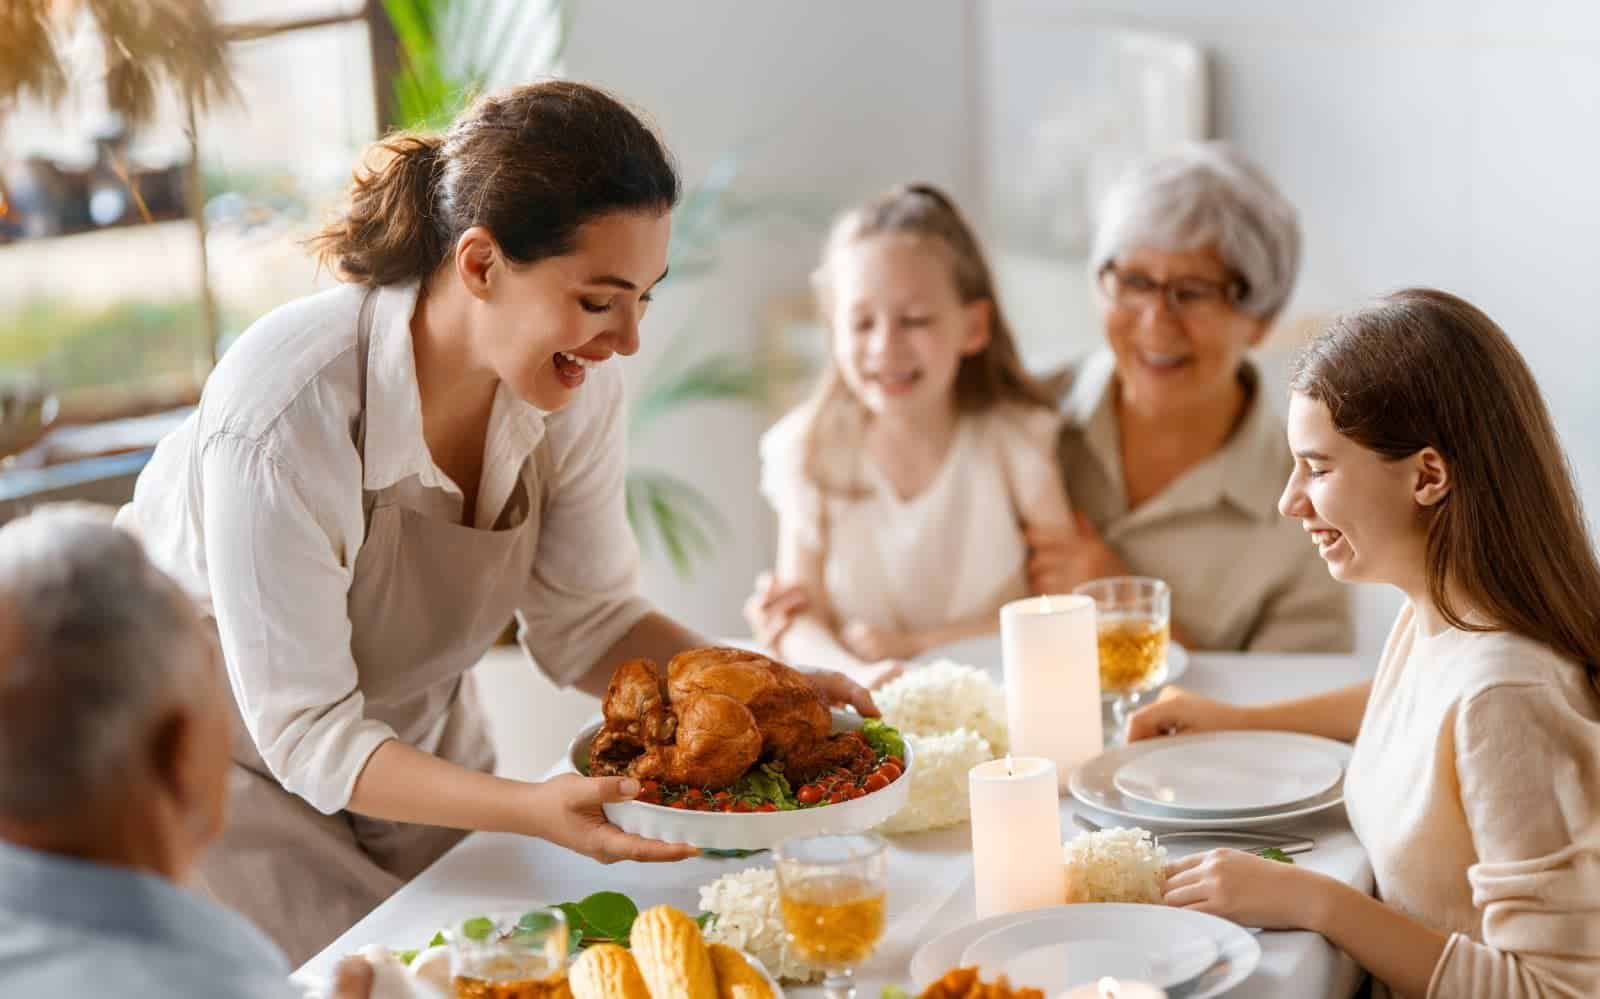 <p class="wp-caption-text">Image Credit: Shutterstock / Yuganov Konstantin</p>  <p><span>Establish family rituals and traditions, such as weekly dinners or game nights, to strengthen bonds, foster connection, and provide opportunities for open communication and bonding.</span></p>